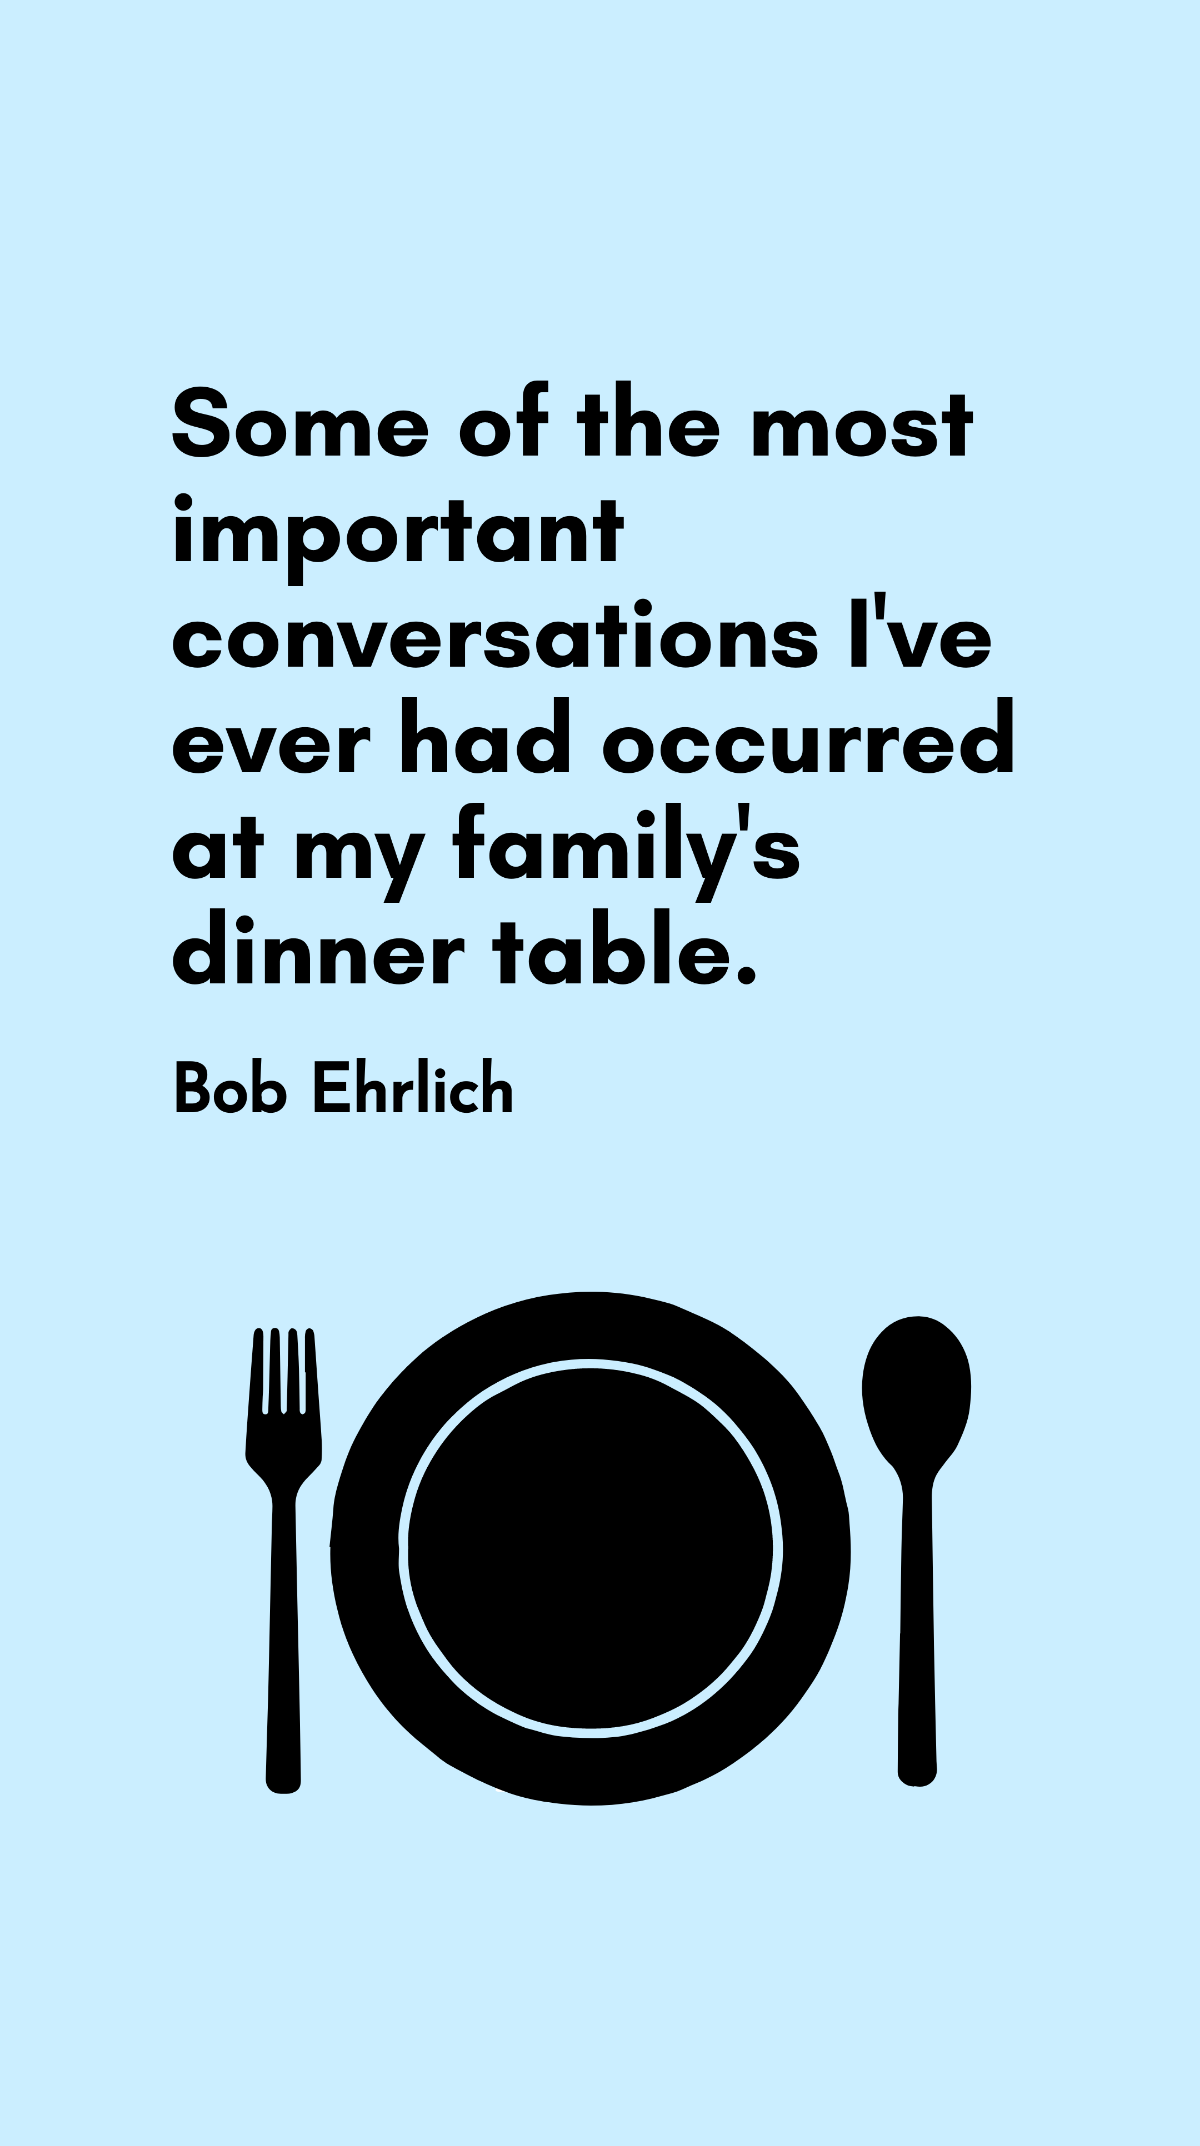 Bob Ehrlich - Some of the most important conversations I've ever had occurred at my family's dinner table. Template